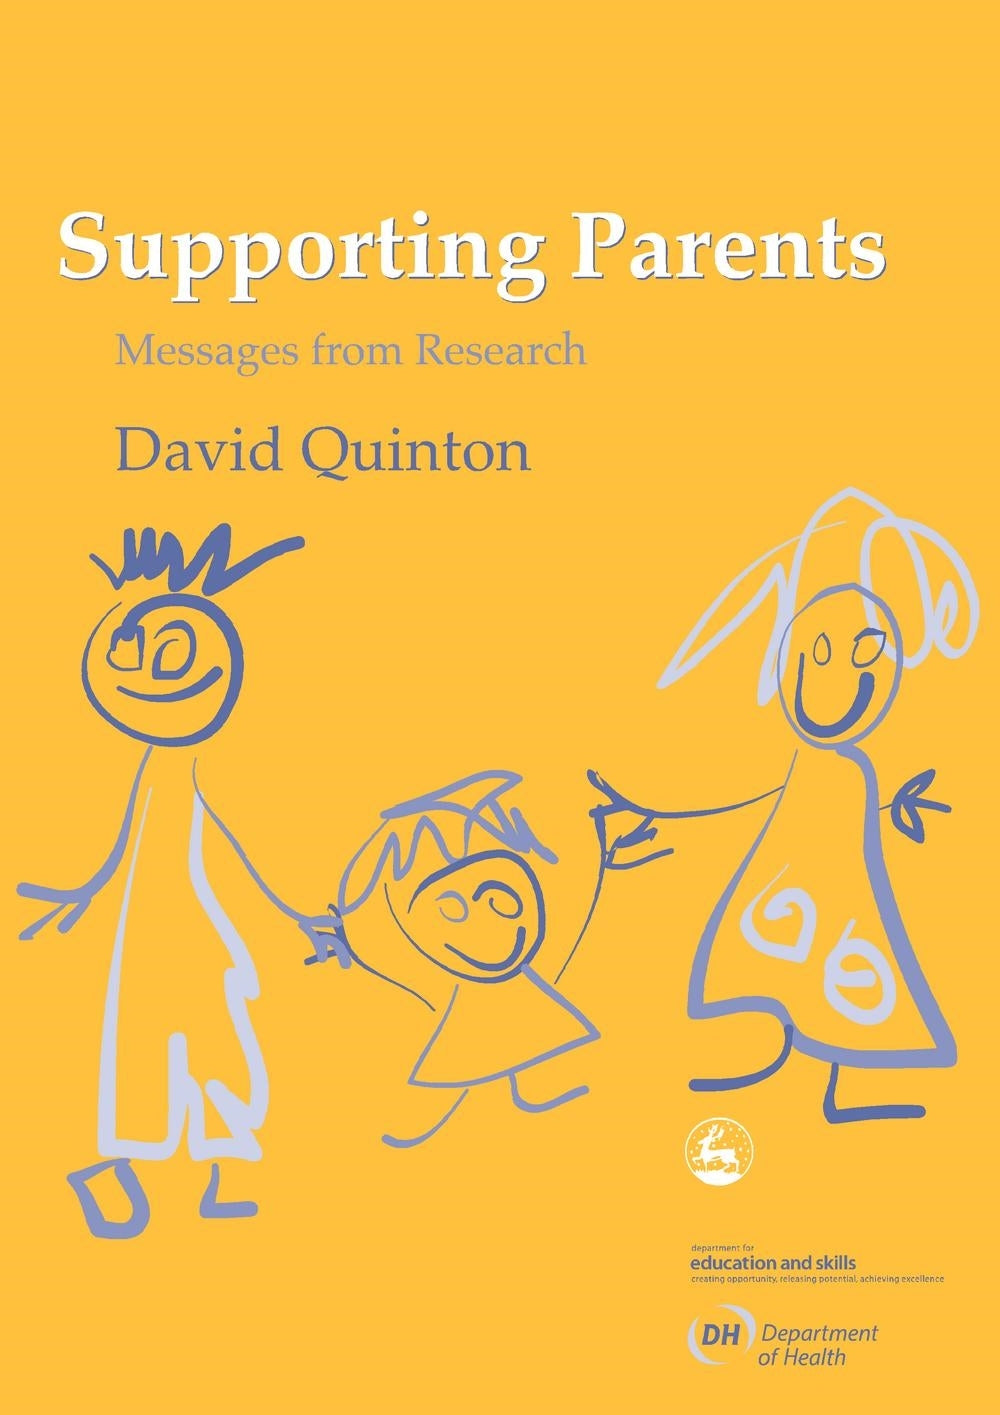 Supporting Parents by David Quinton